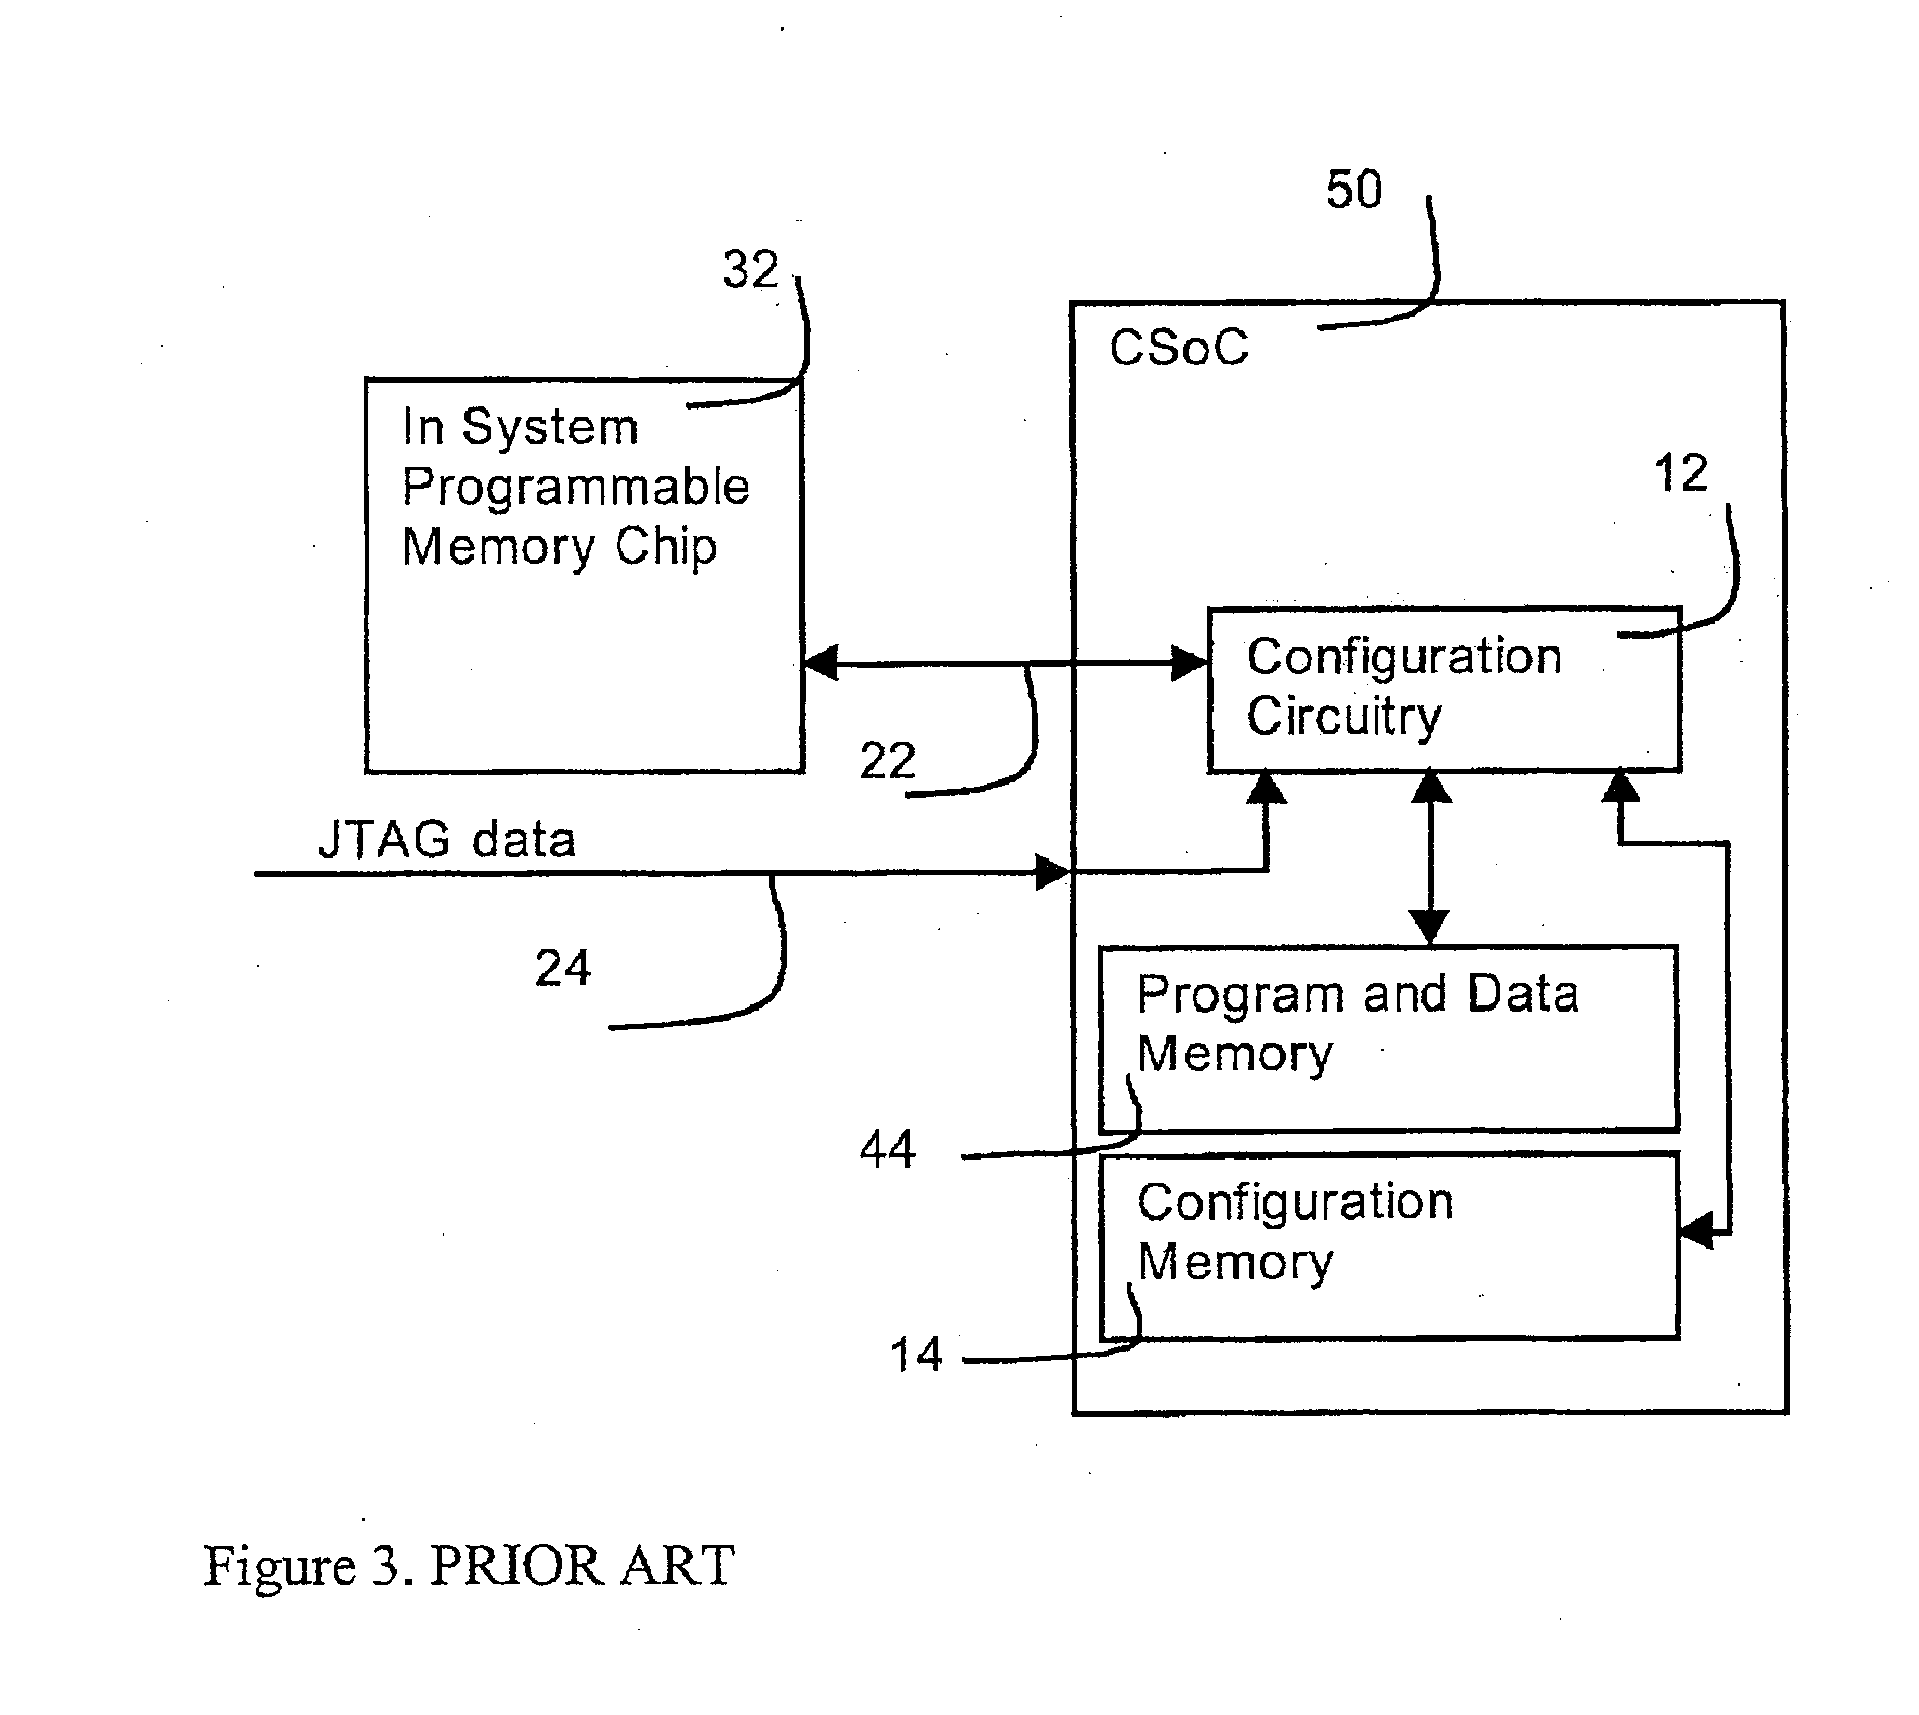 Method and Apparatus for Secure Configuration of a Field Programmable Gate Array